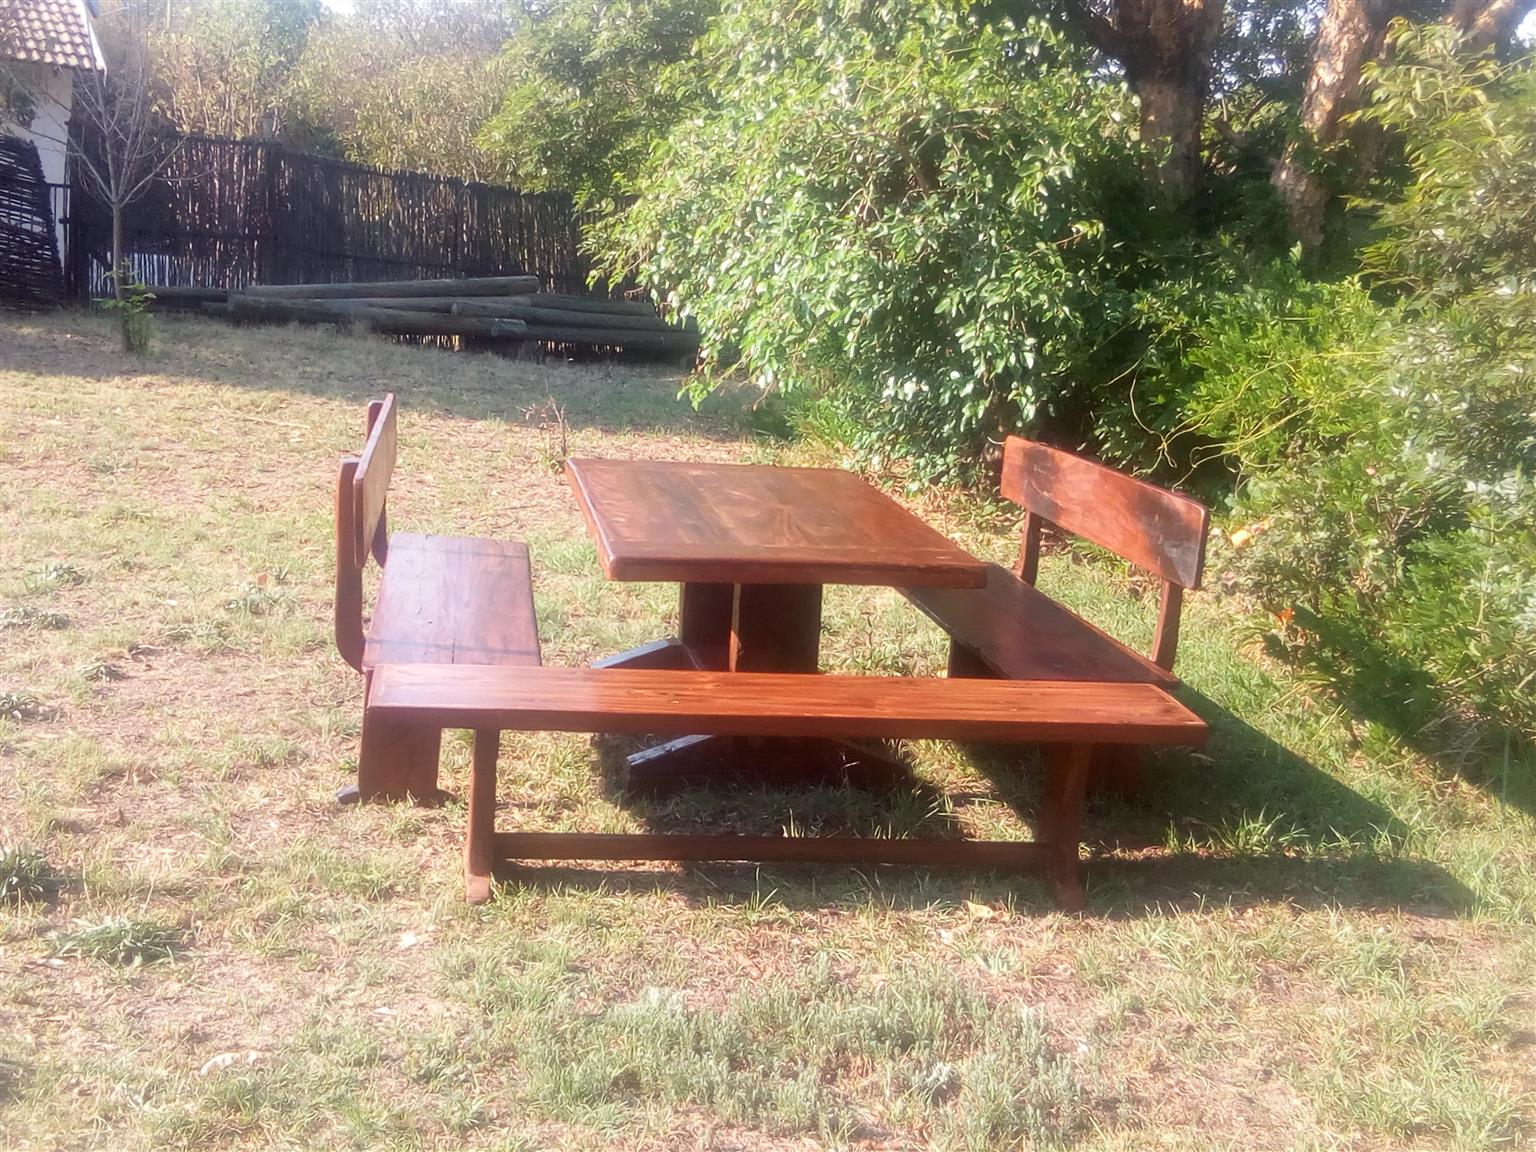 Patio Dining Tables and Benches